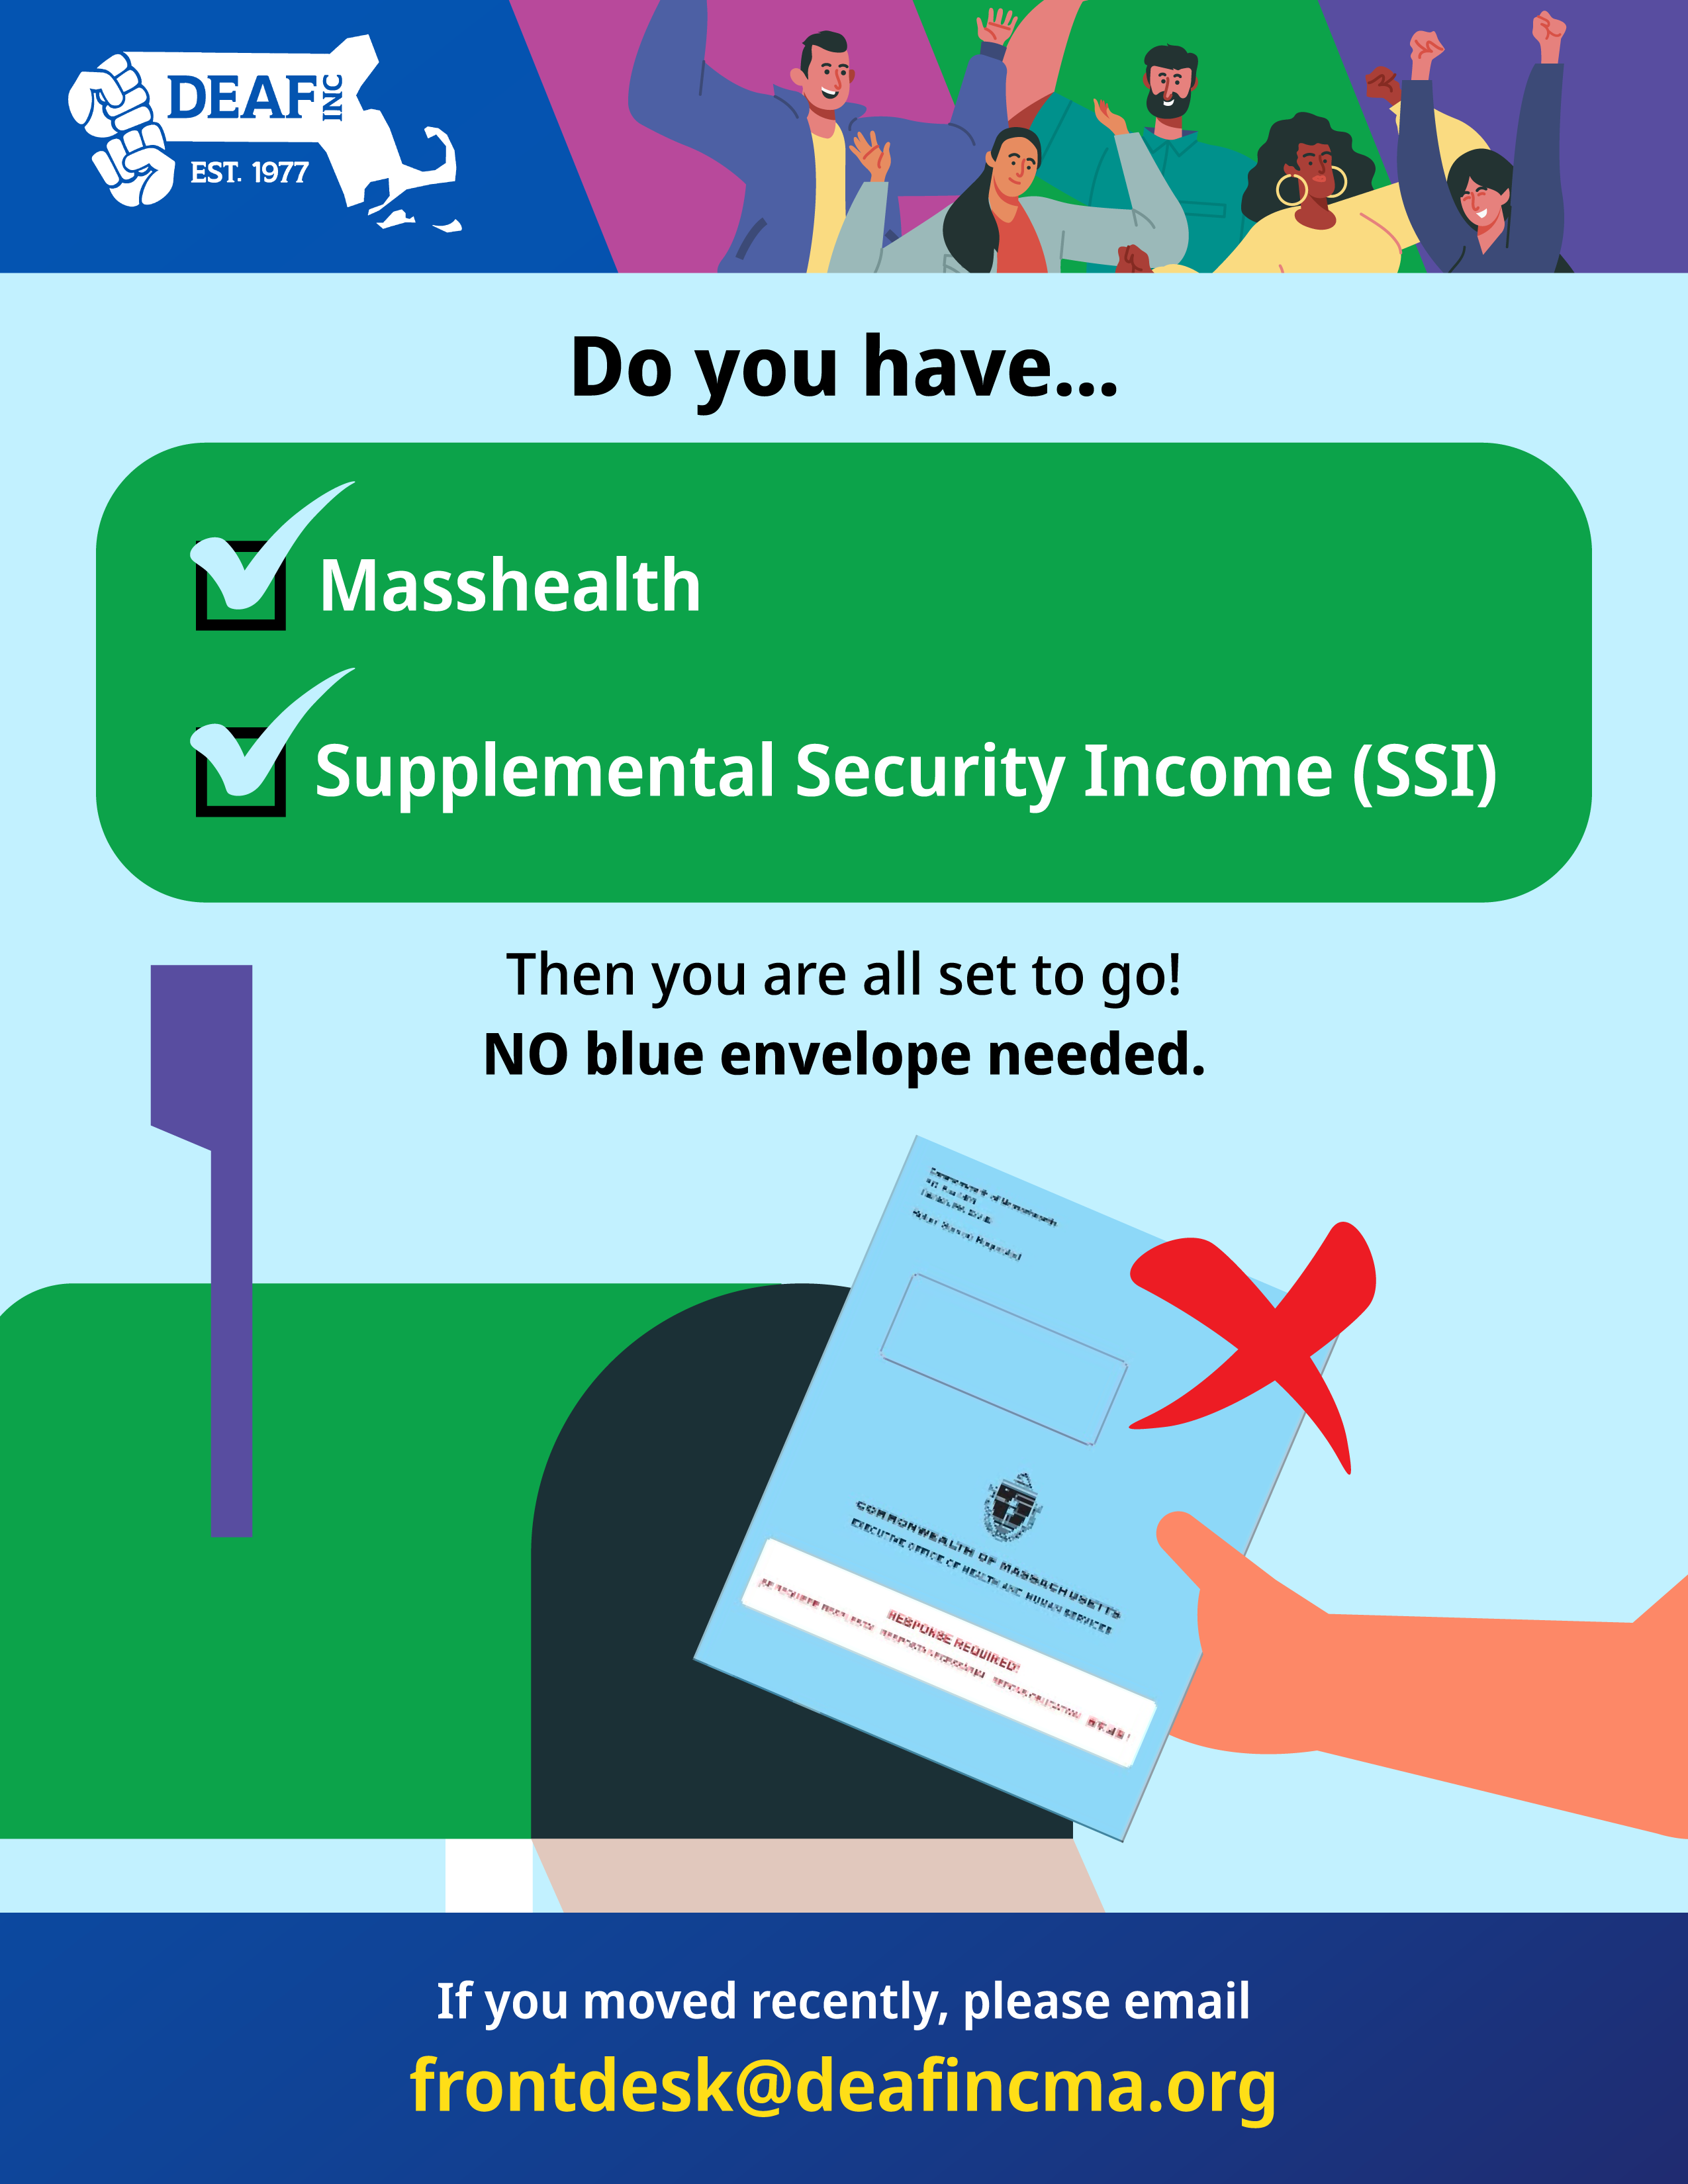 Flyer: A light blue back ground, at the very top is the DEAF, Inc. logo, and at the center is a hand putting a blue paper into a green mailbox. The text reads, “Do you have... Masshealth Supplemental Security Income (SSI) Then you are all set to go! NO blue envelope needed. If you moved recently, please email frontdesk@deafincma.org”